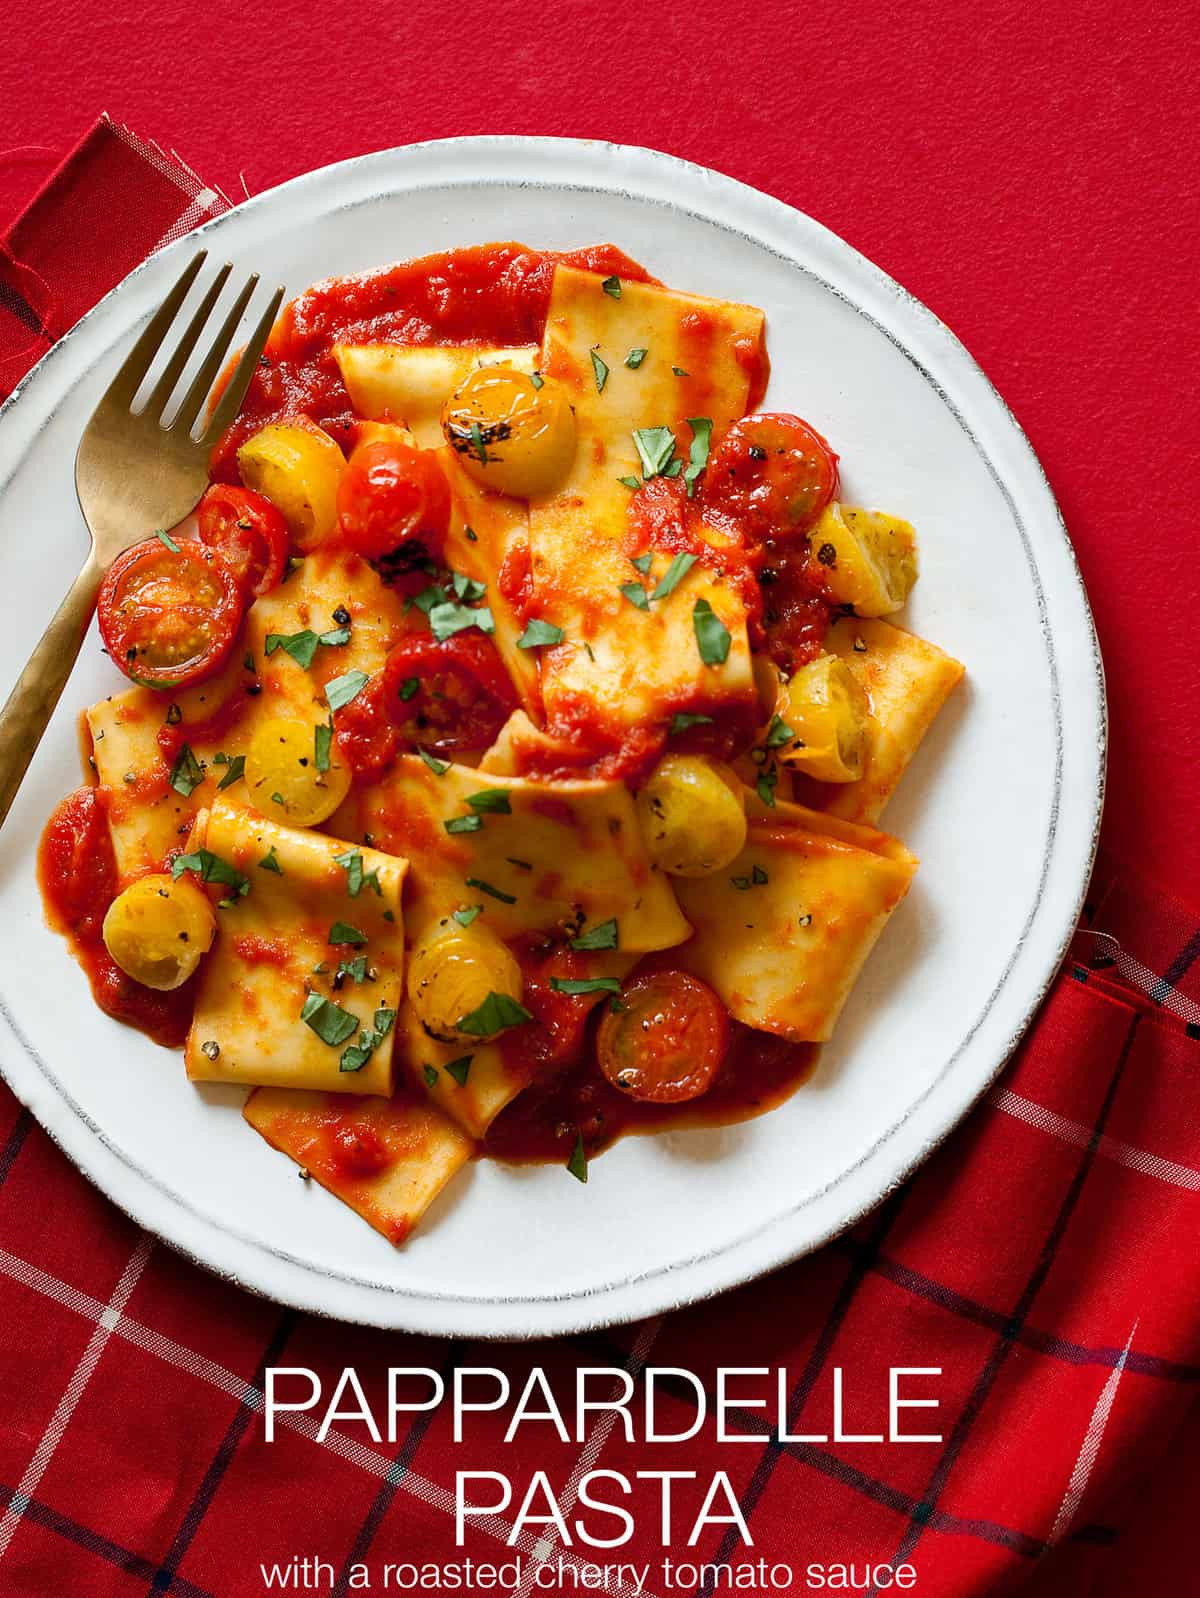 Cherry Tomatoes Sauce Recipes
 Pappardelle Pasta with a Roasted Cherry Tomato Sauce recipe